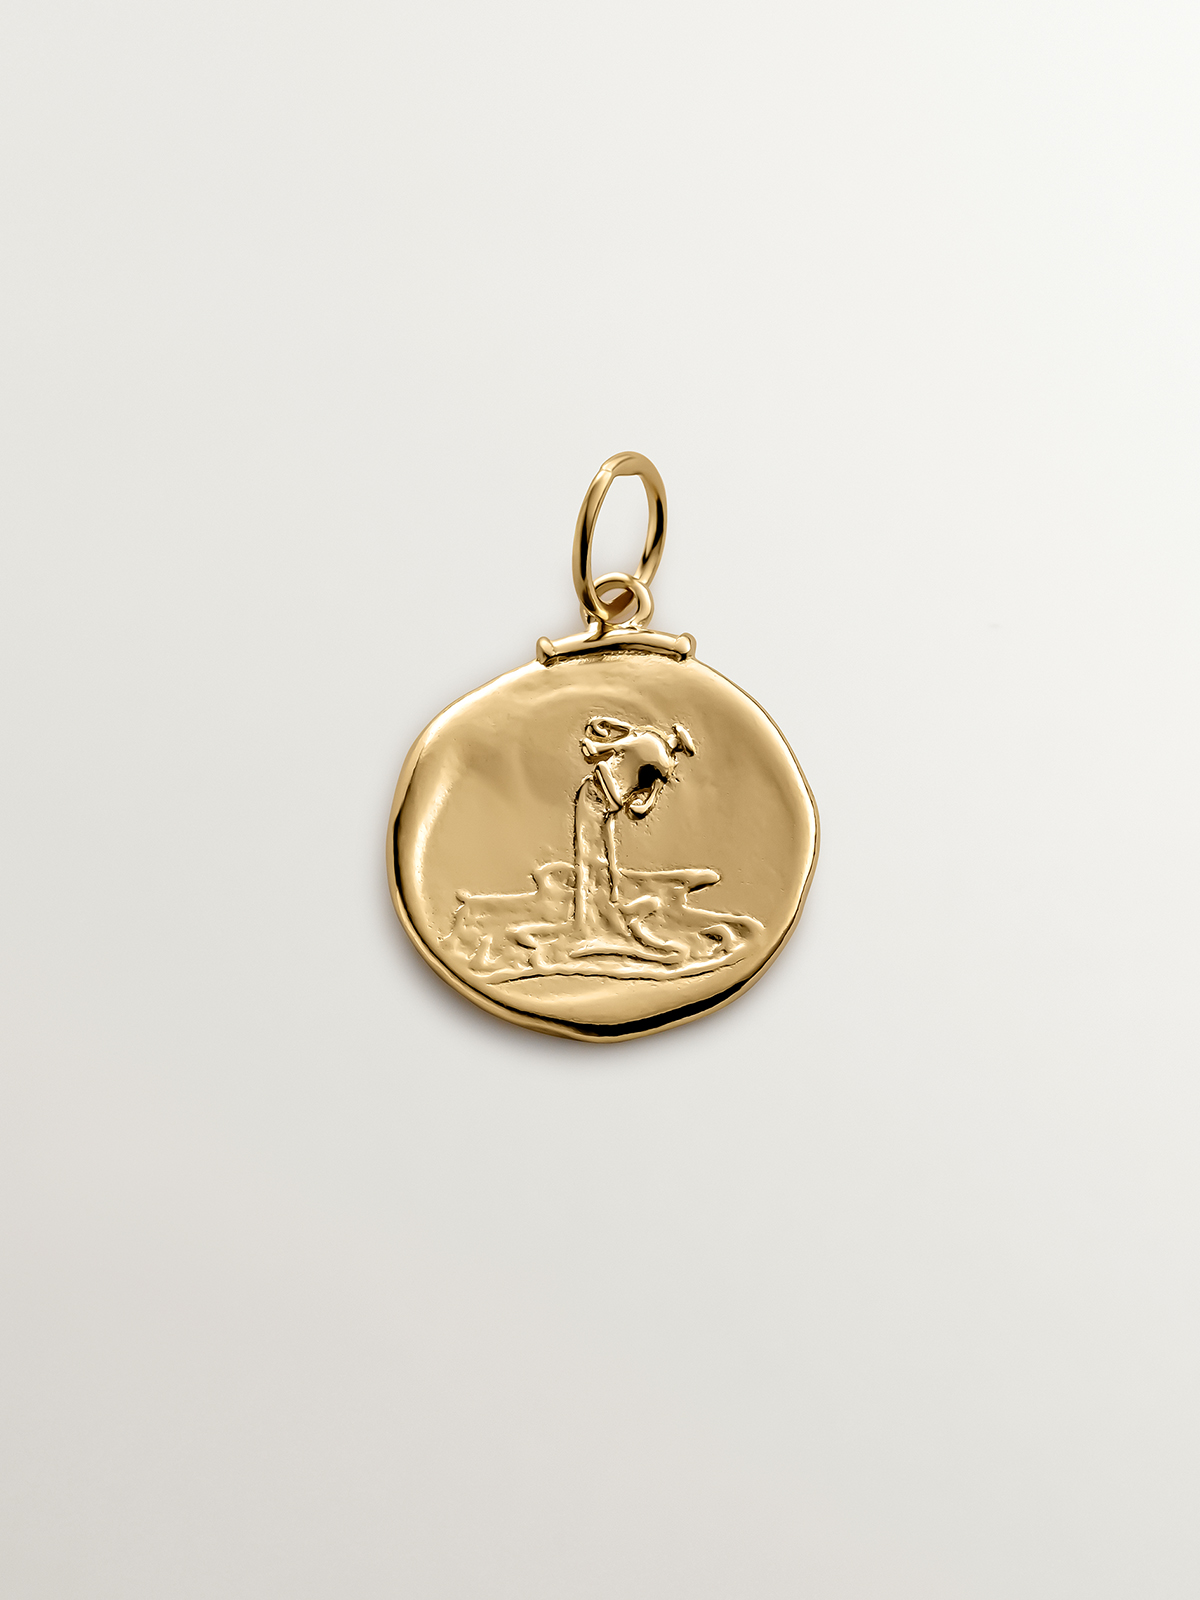 925 Silver Aquarius Charm Coated in 18K Yellow Gold